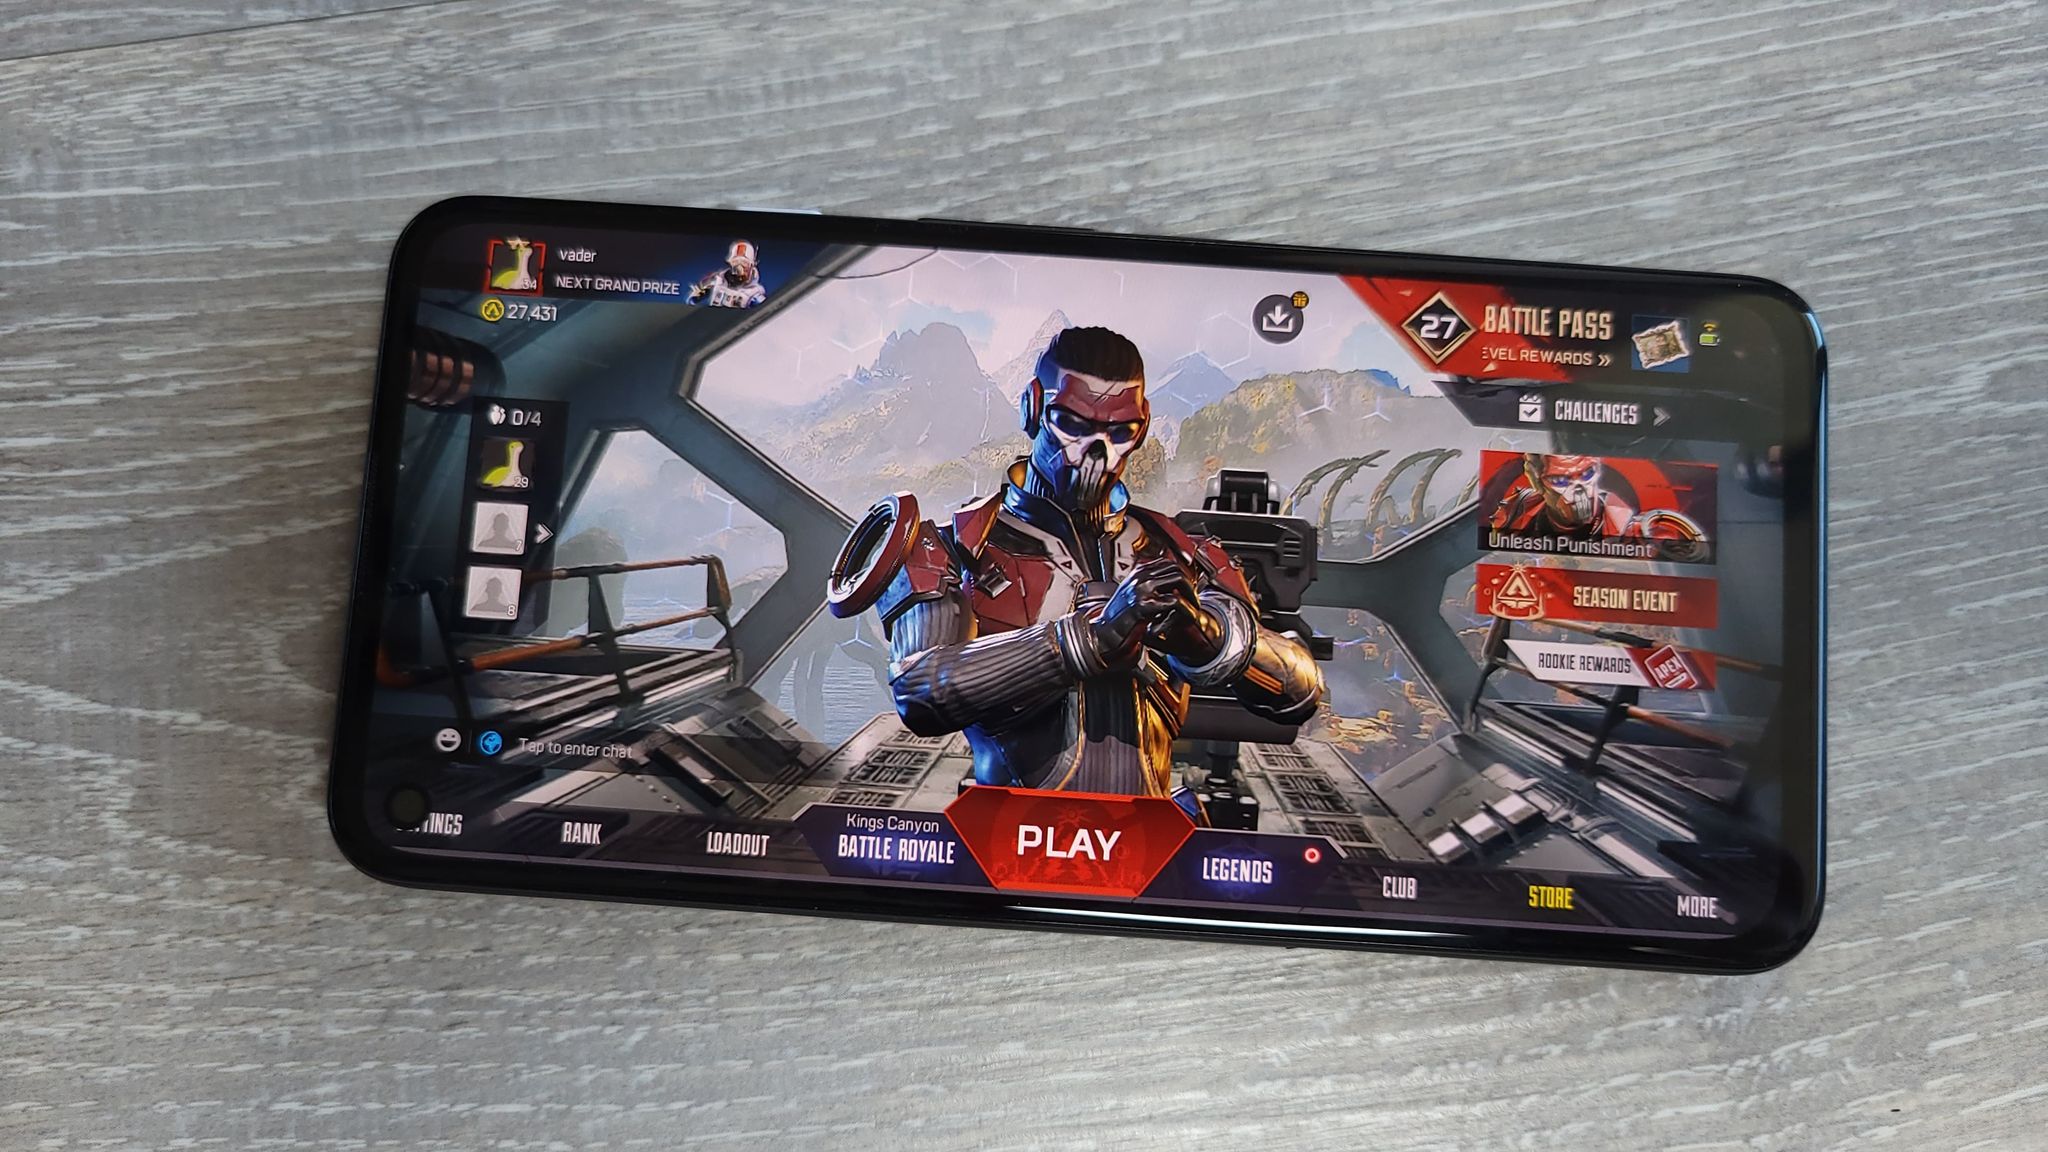 Can Apex Legends run on a mobile device? - Quora